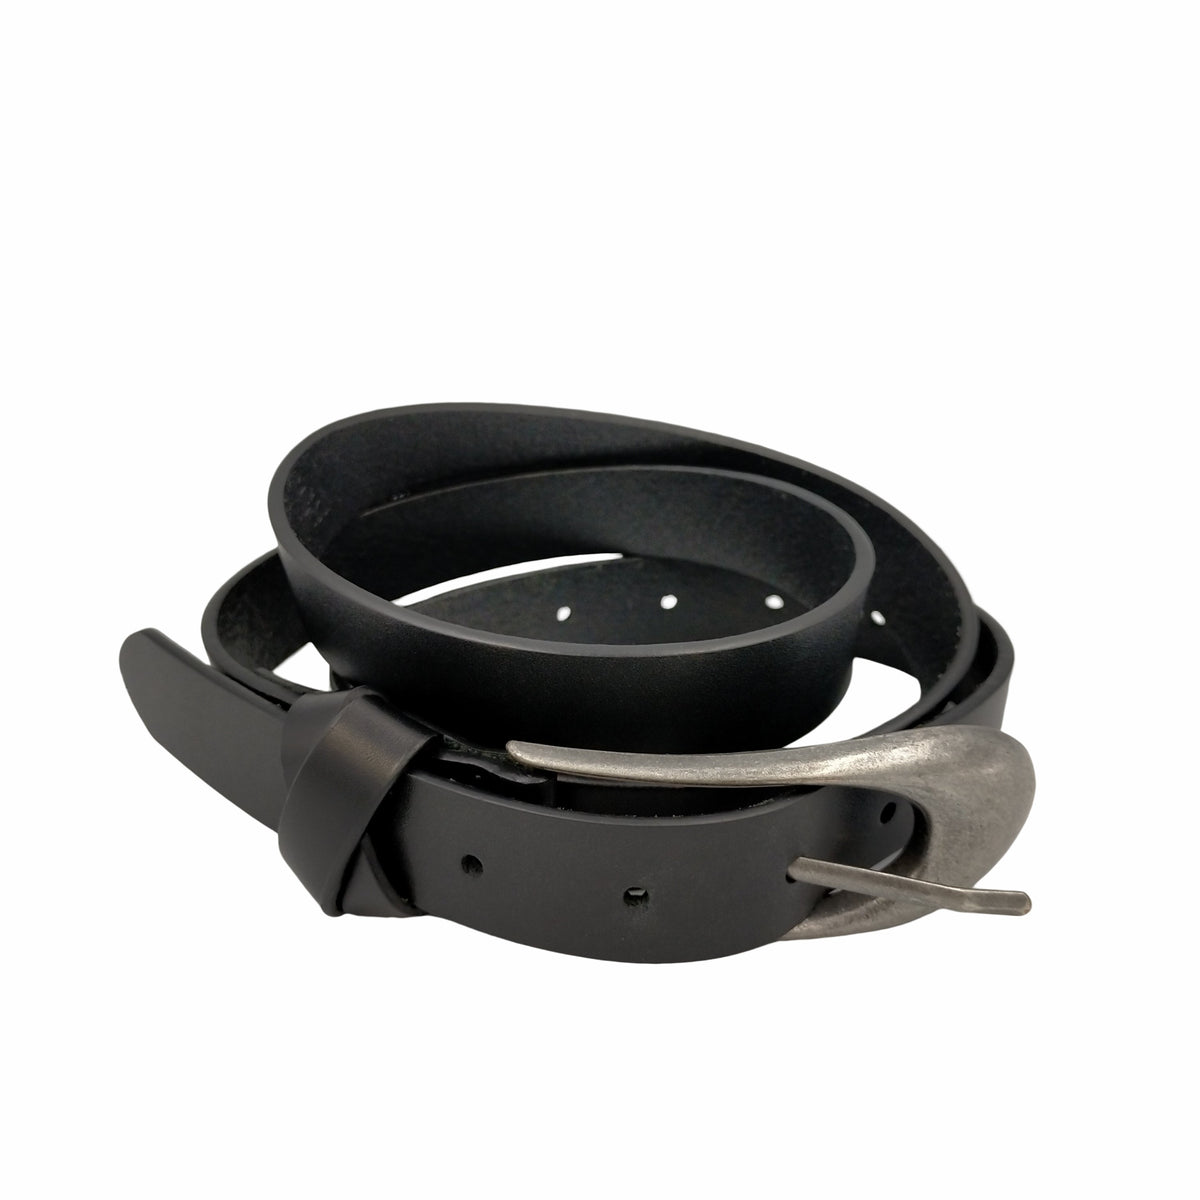 fax copy express Belt With Irregular Metal Buckle メンズ FREE